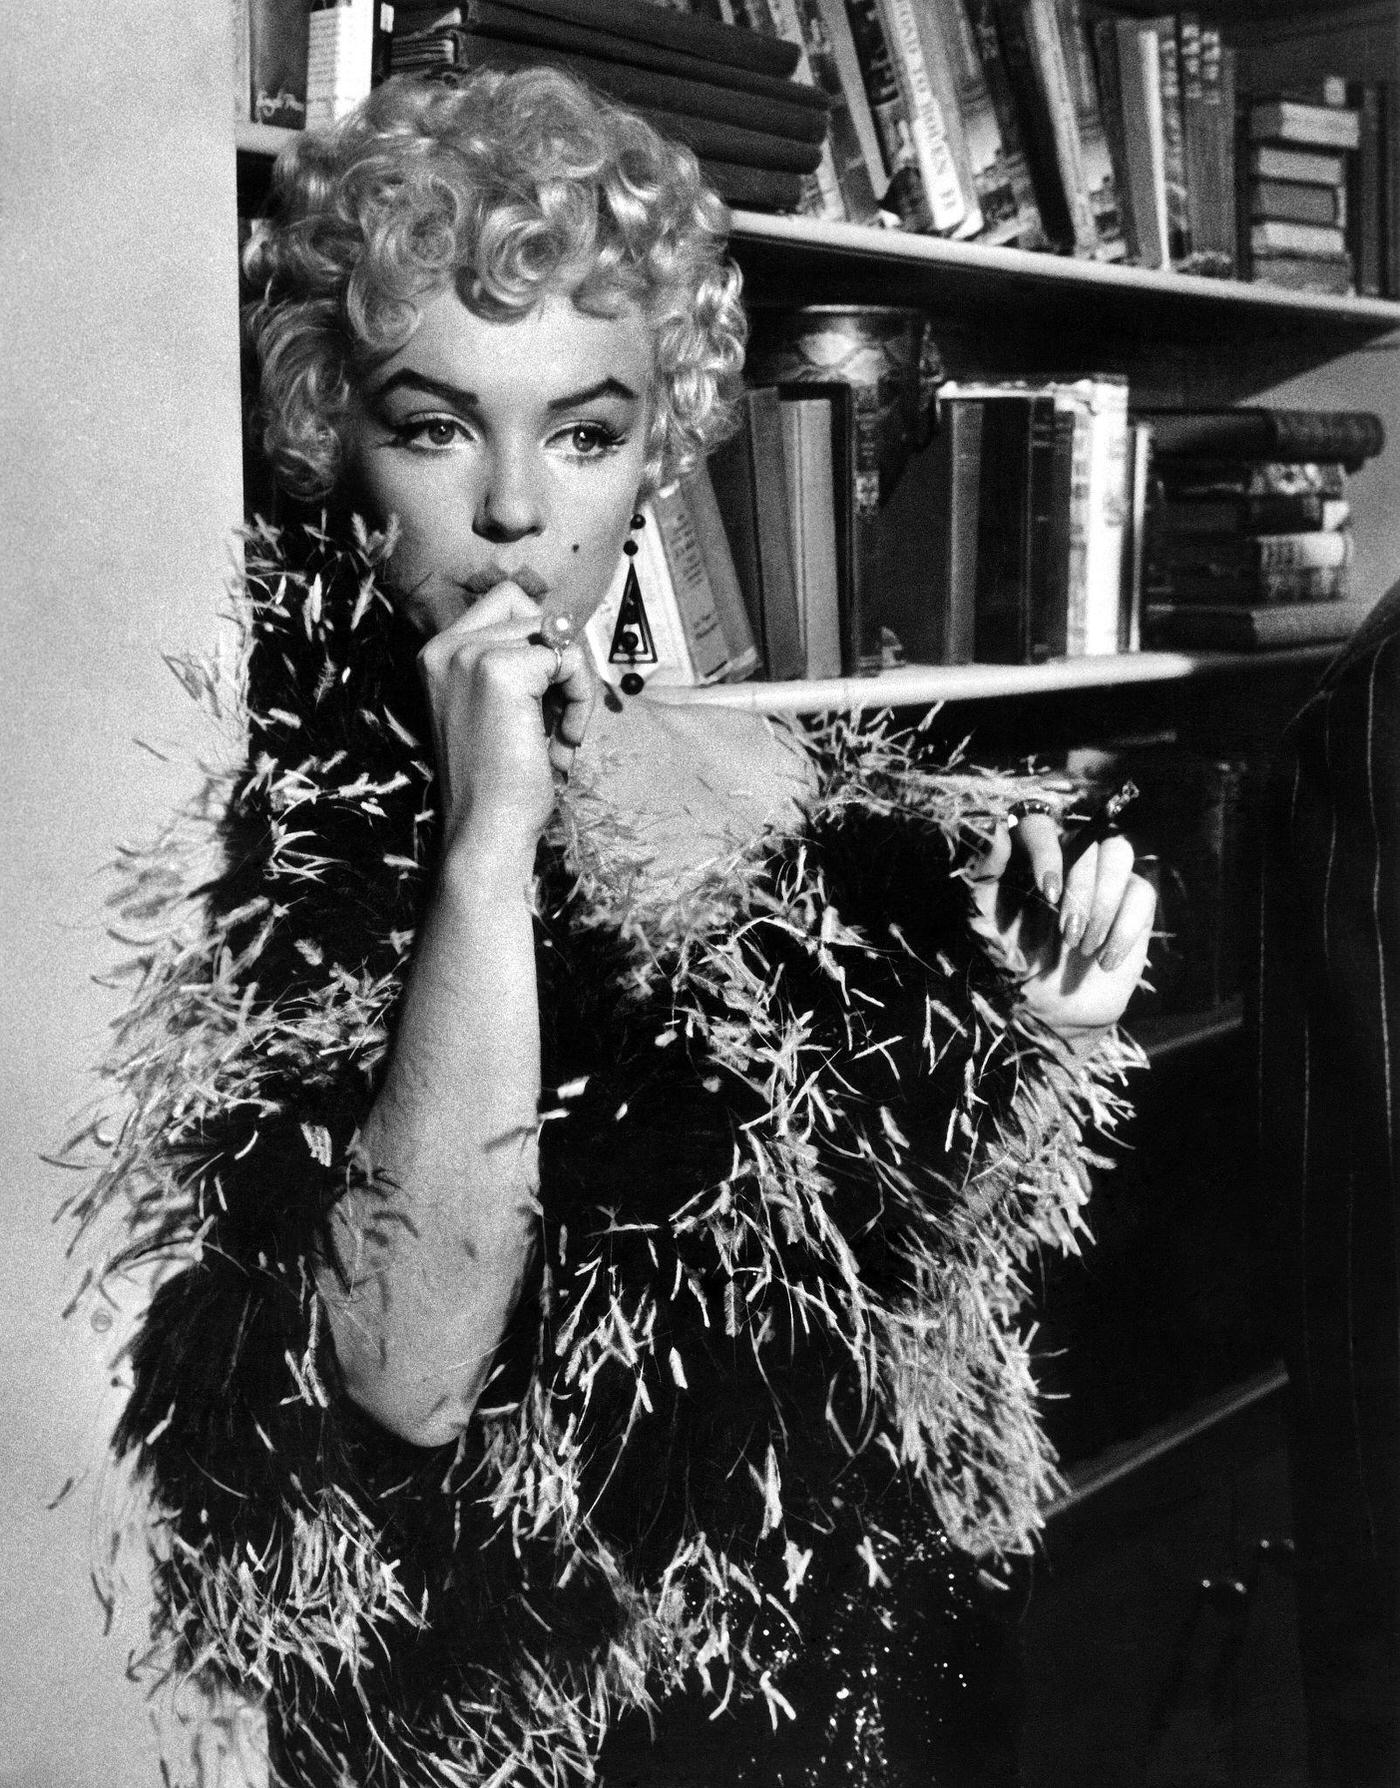 Marilyn Monroe stands in front of a bookcase wearing a feather boa in 1954 during the filming of "The Seven Year Itch"